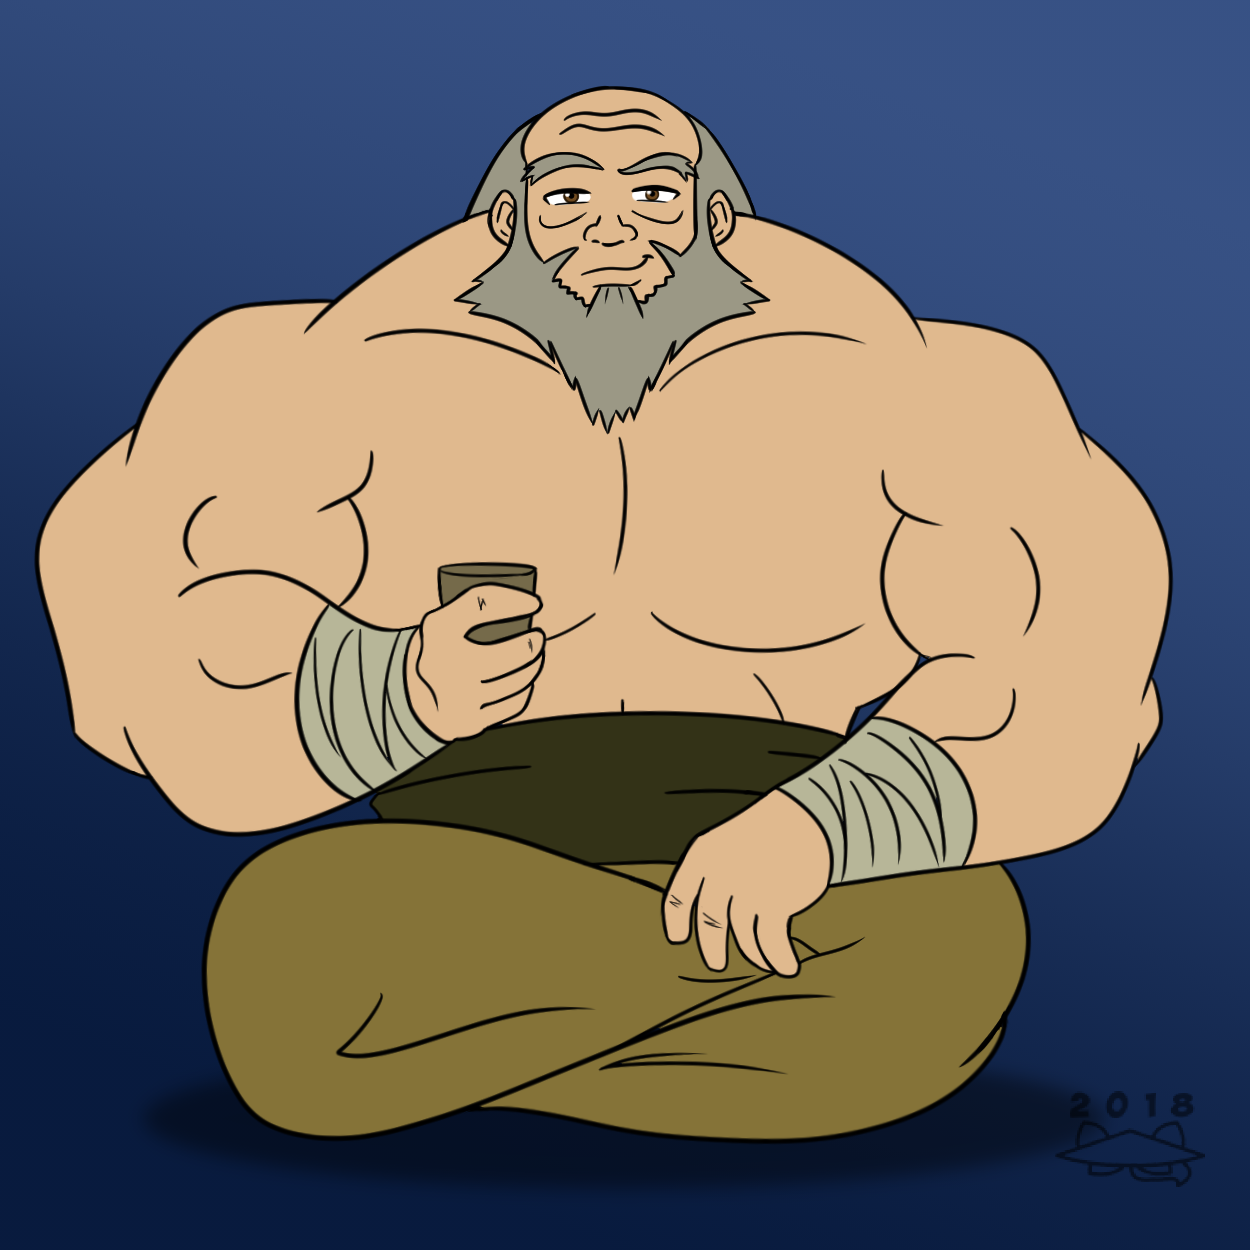 Uncle iroh buff - 🧡 Uncle Iroh Comes to SMITE to Share Some Wisdom - GameS...